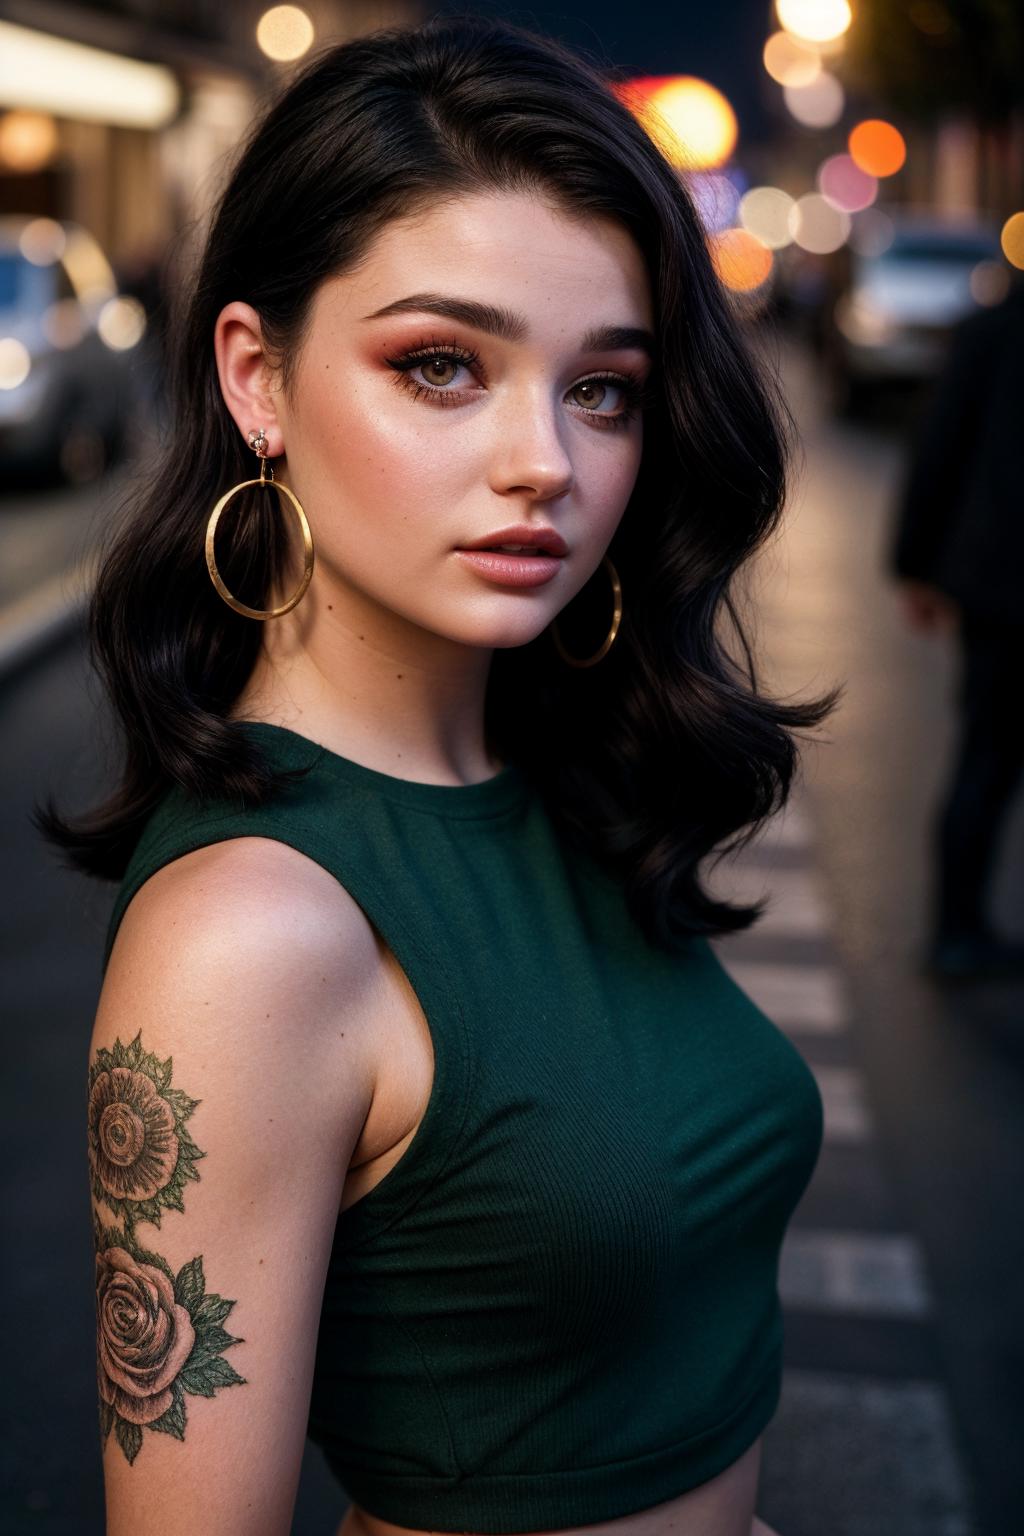 A young woman with a tattoo wearing a green shirt and large gold hoop earrings.